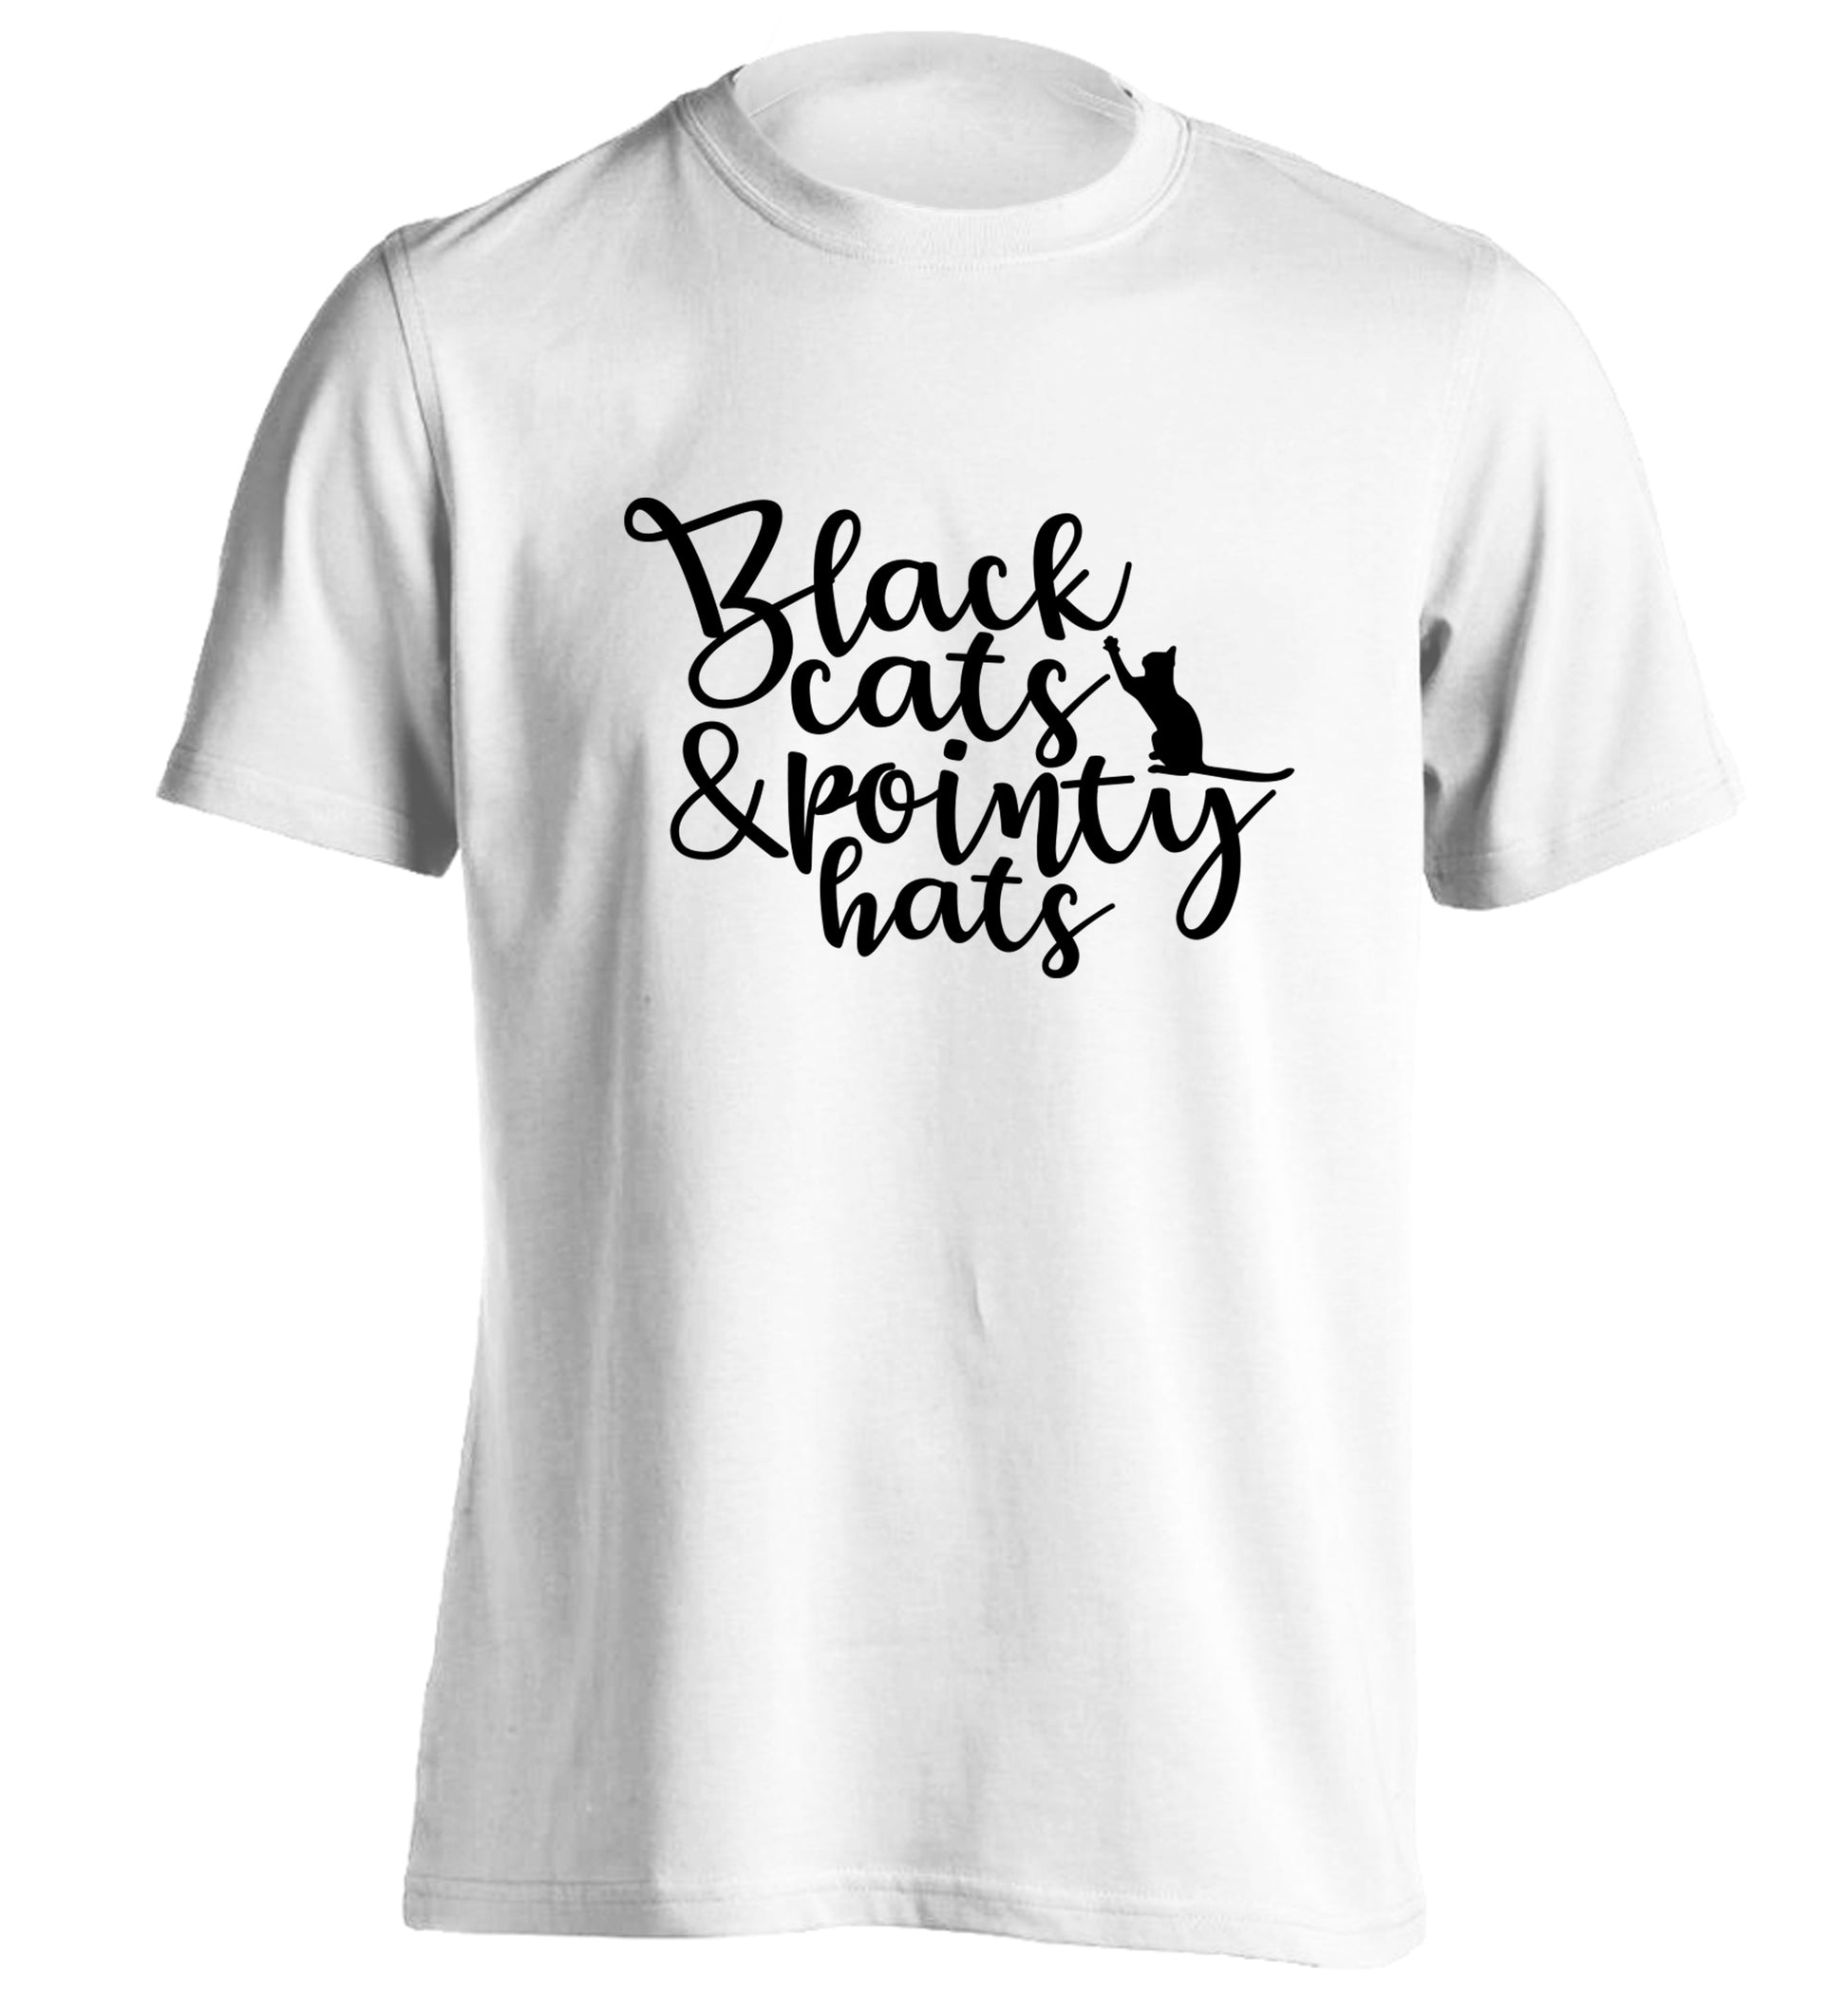 Black cats and pointy hats adults unisex white Tshirt 2XL